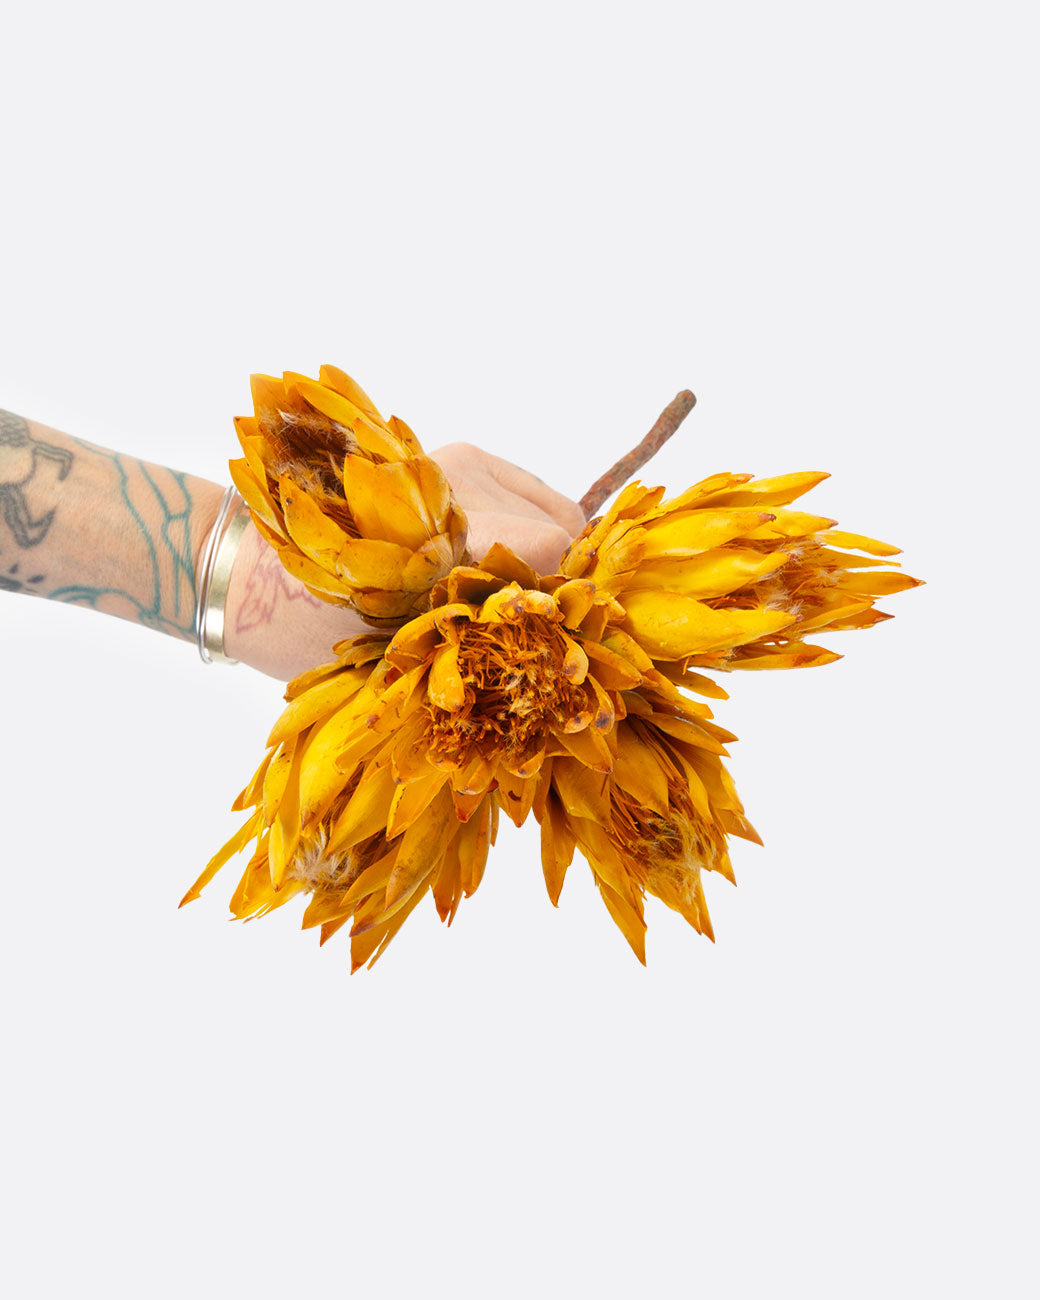 Hand holding bundle of dried yellow protea.